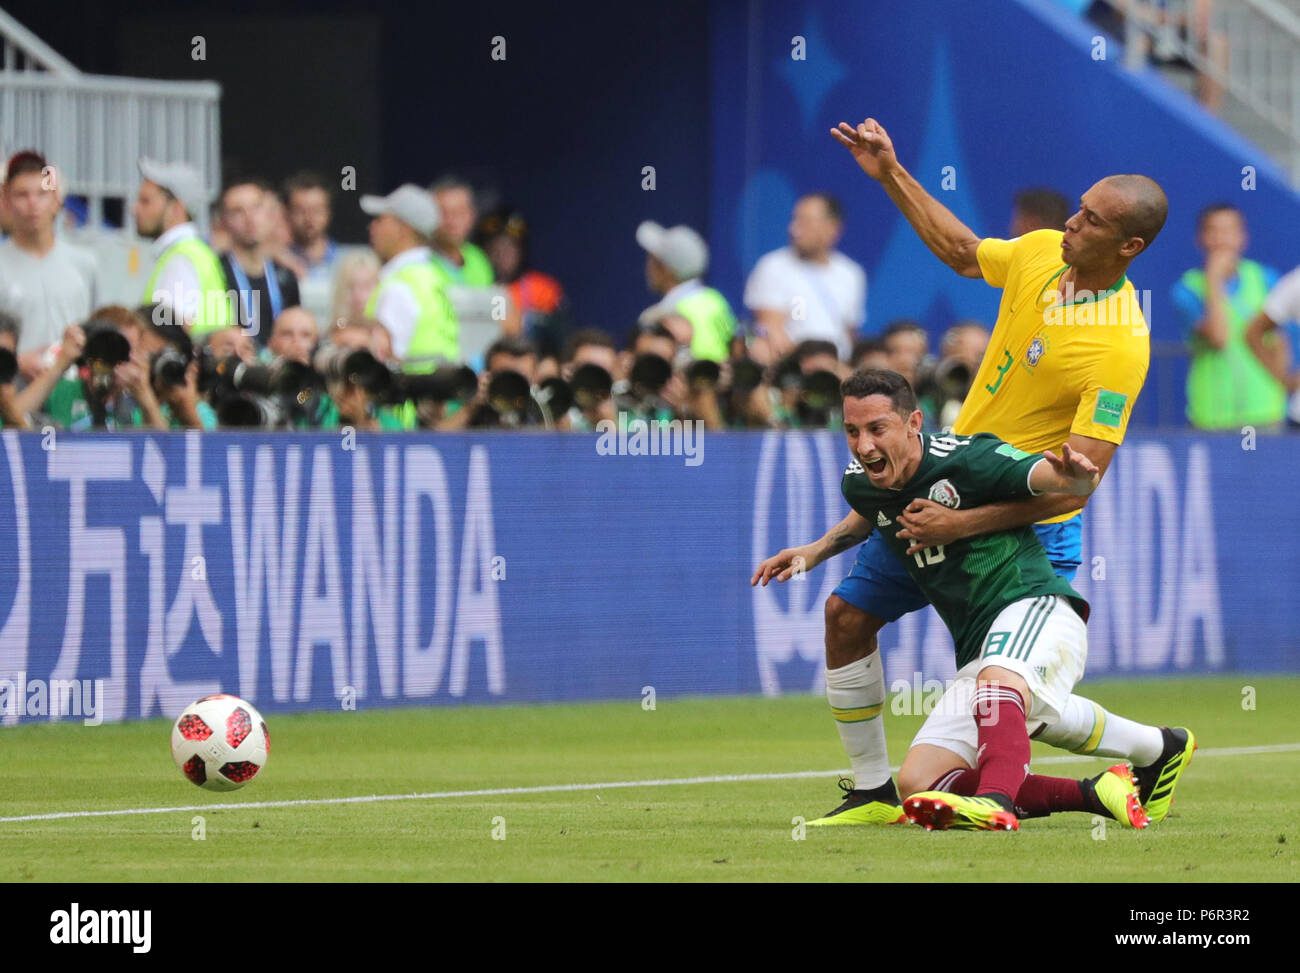 Samara, Russia. 02nd July, 2018. Soccer, World Cup 2018, Final Round - Round of 16: Mexico vs. Brazil at the Samara Stadium: Brazil's Miranda (R) and Mexico's Andres Guardado vying for the ball. Credit: Christian Charisius/dpa/Alamy Live News Stock Photo